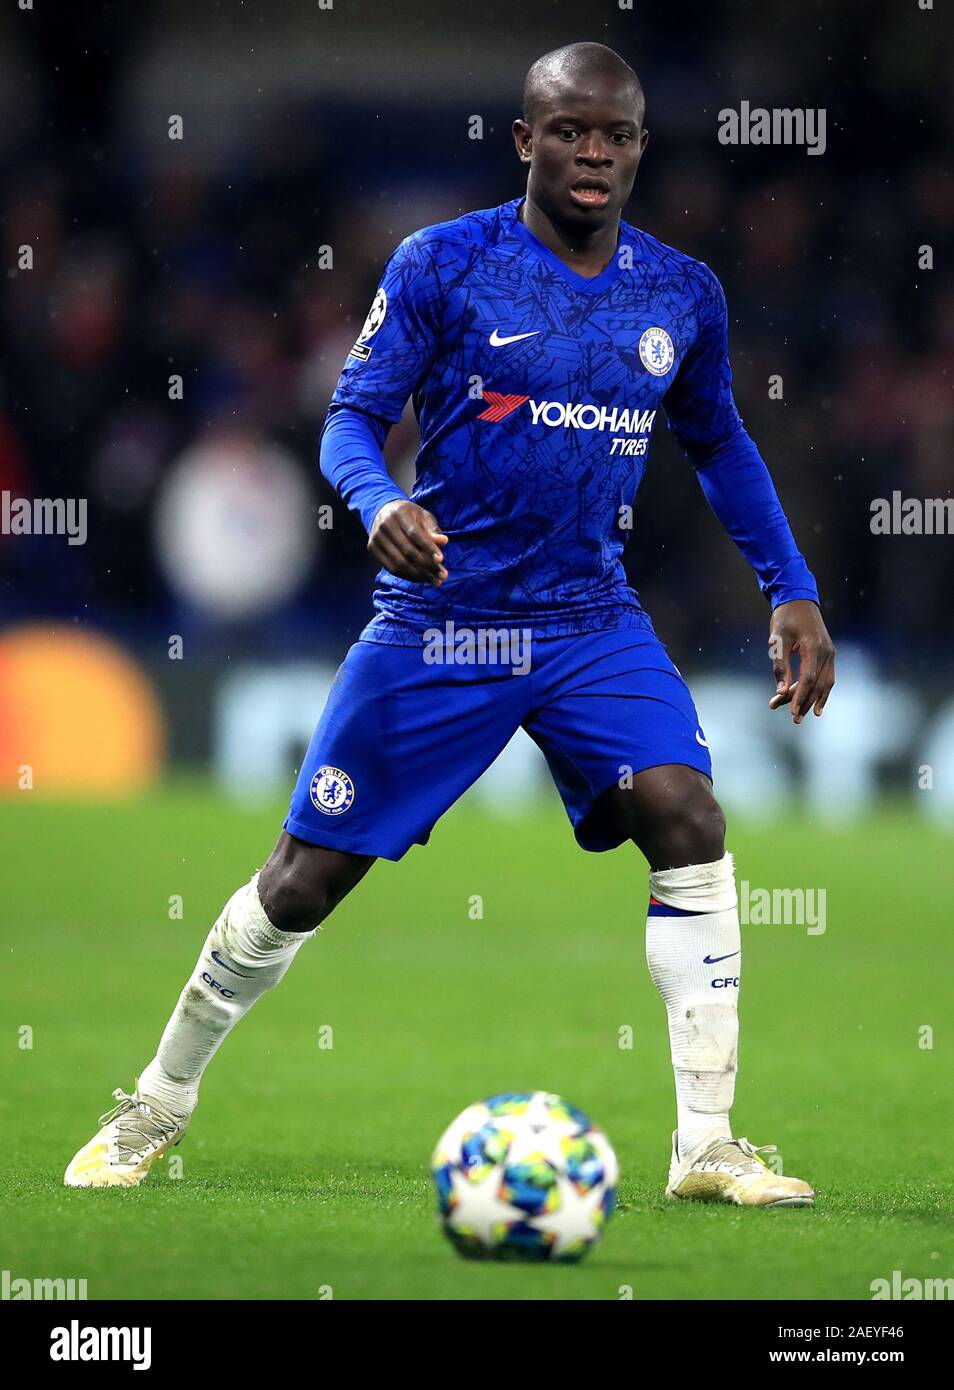 Chelsea's N'Golo Kante during the UEFA Champions League match at Stamford Bridge, London Stock Photo